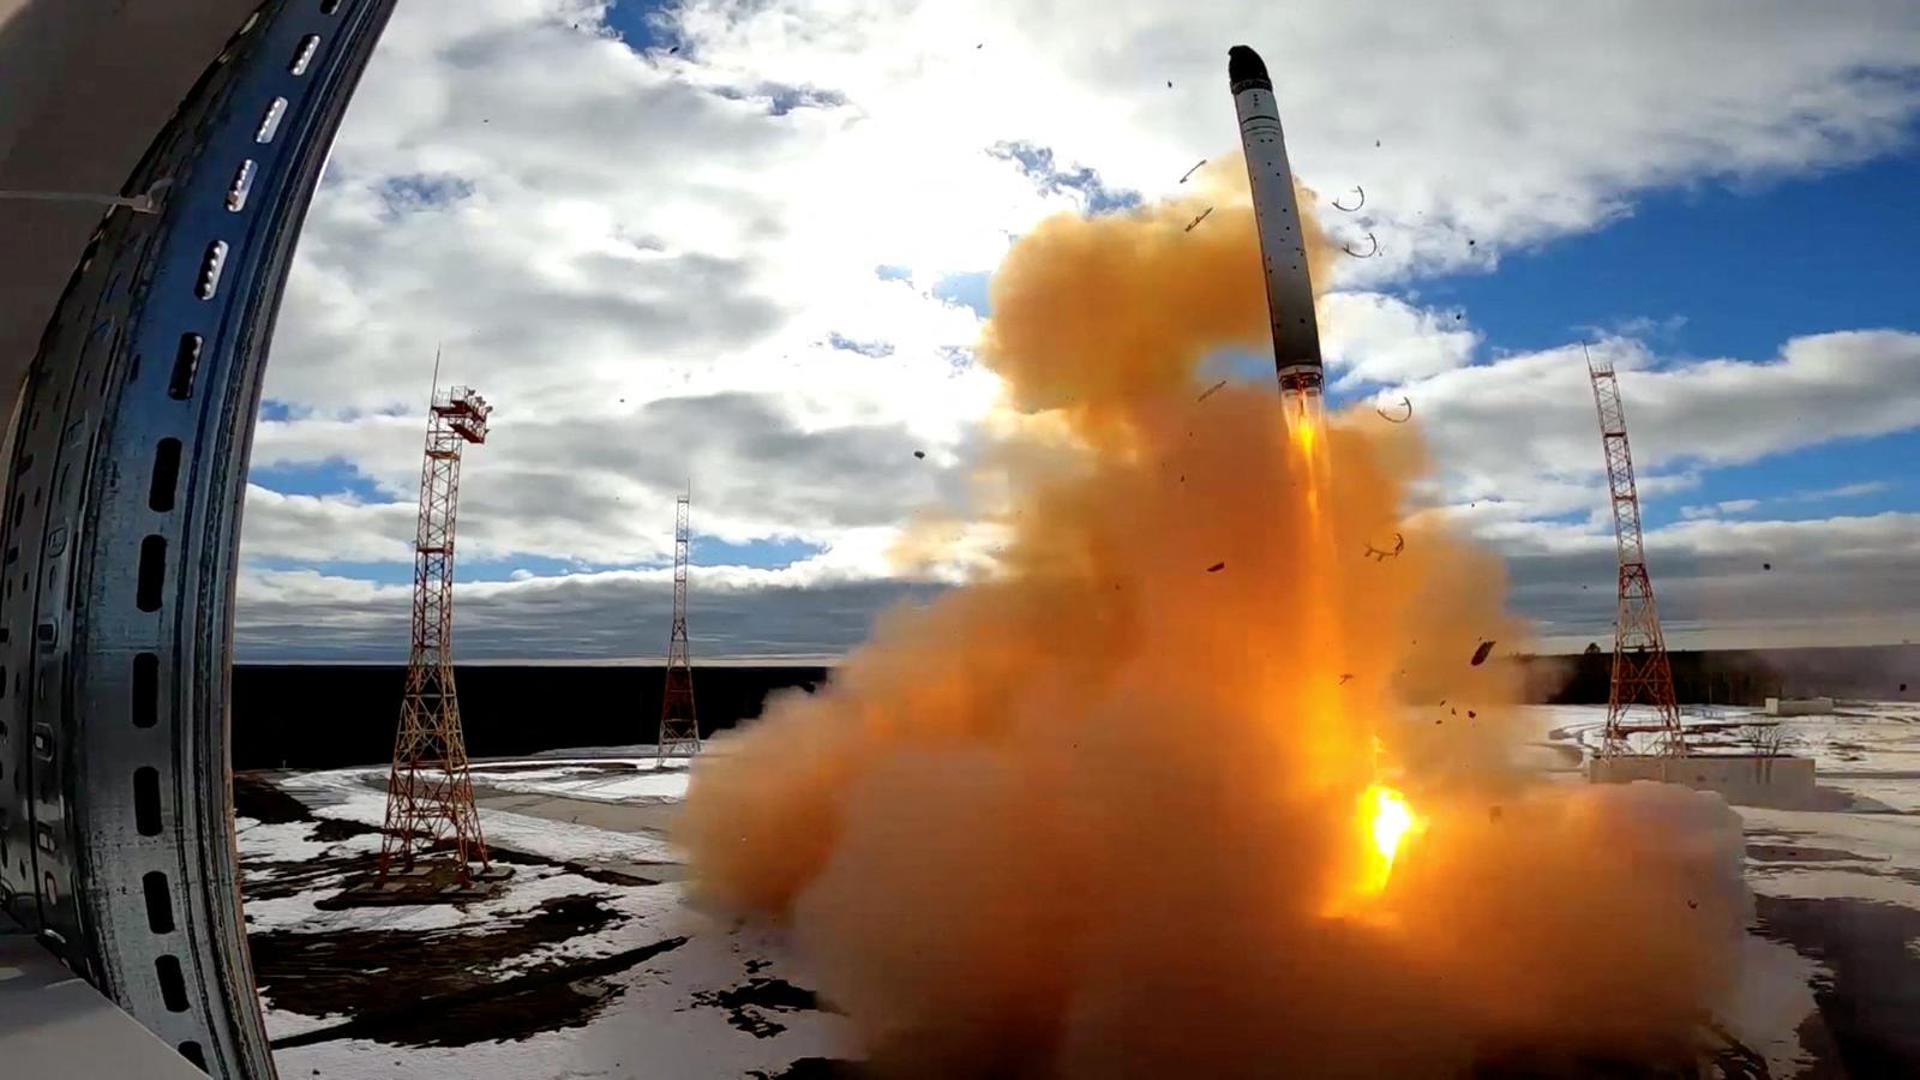 A Sarmat intercontinental ballistic missile is test-launched by the Russian military at the Plesetsk cosmodrome in Arkhangelsk region, Russia, in this still image taken from a video released on April 20, 2022. Video released April 20, 2022. Russian Defence Ministry/Handout via REUTERS ATTENTION EDITORS - THIS IMAGE WAS PROVIDED BY A THIRD PARTY. NO RESALES. NO ARCHIVES. MANDATORY CREDIT. Photo: RUSSIAN DEFENCE MINISTRY/REUTERS